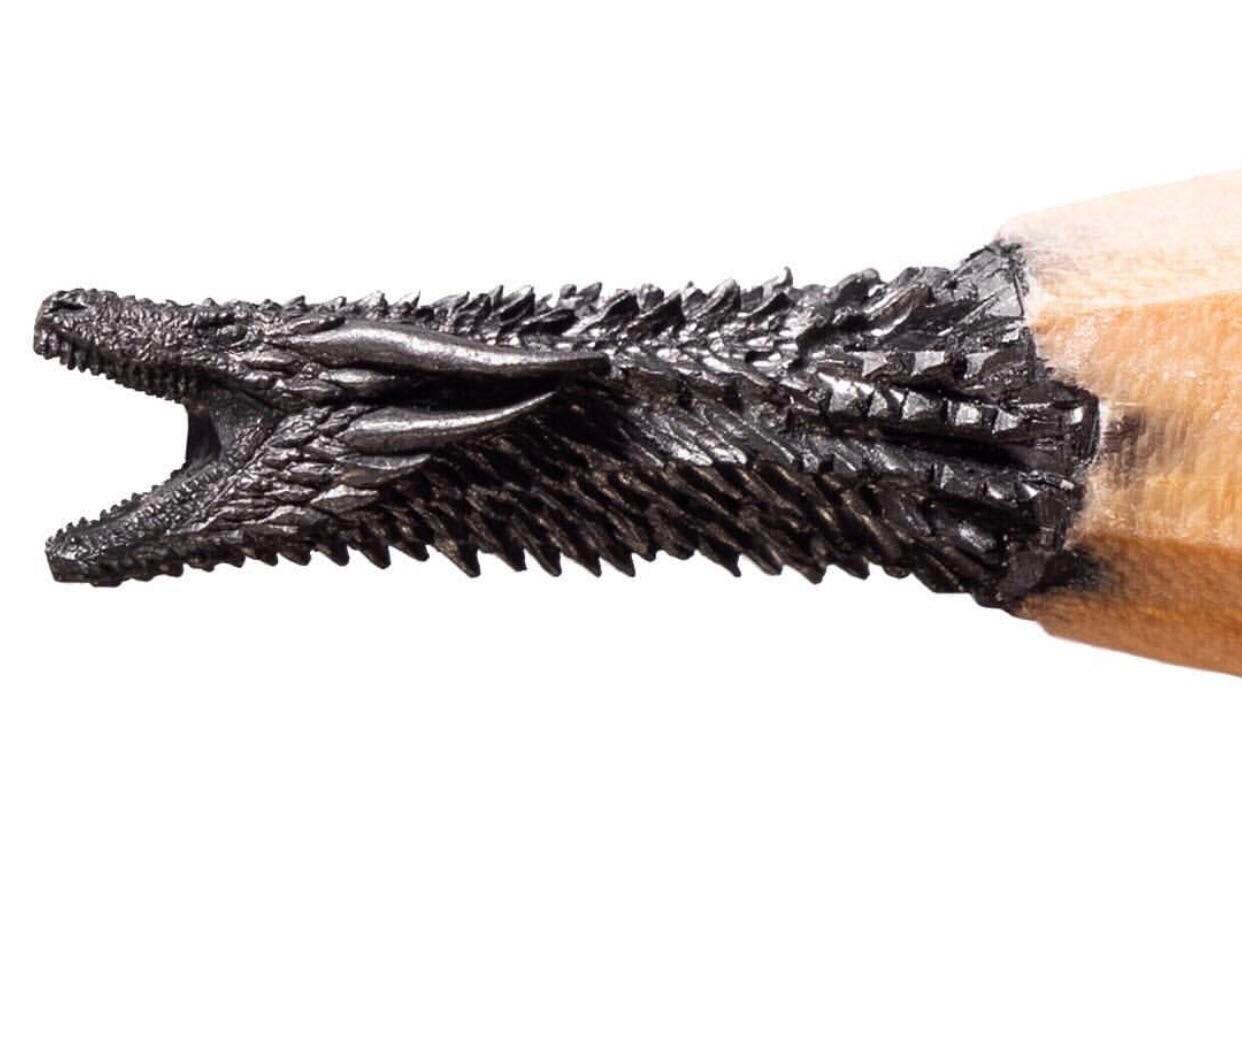 This Dragon carved into the graphite of a pencil